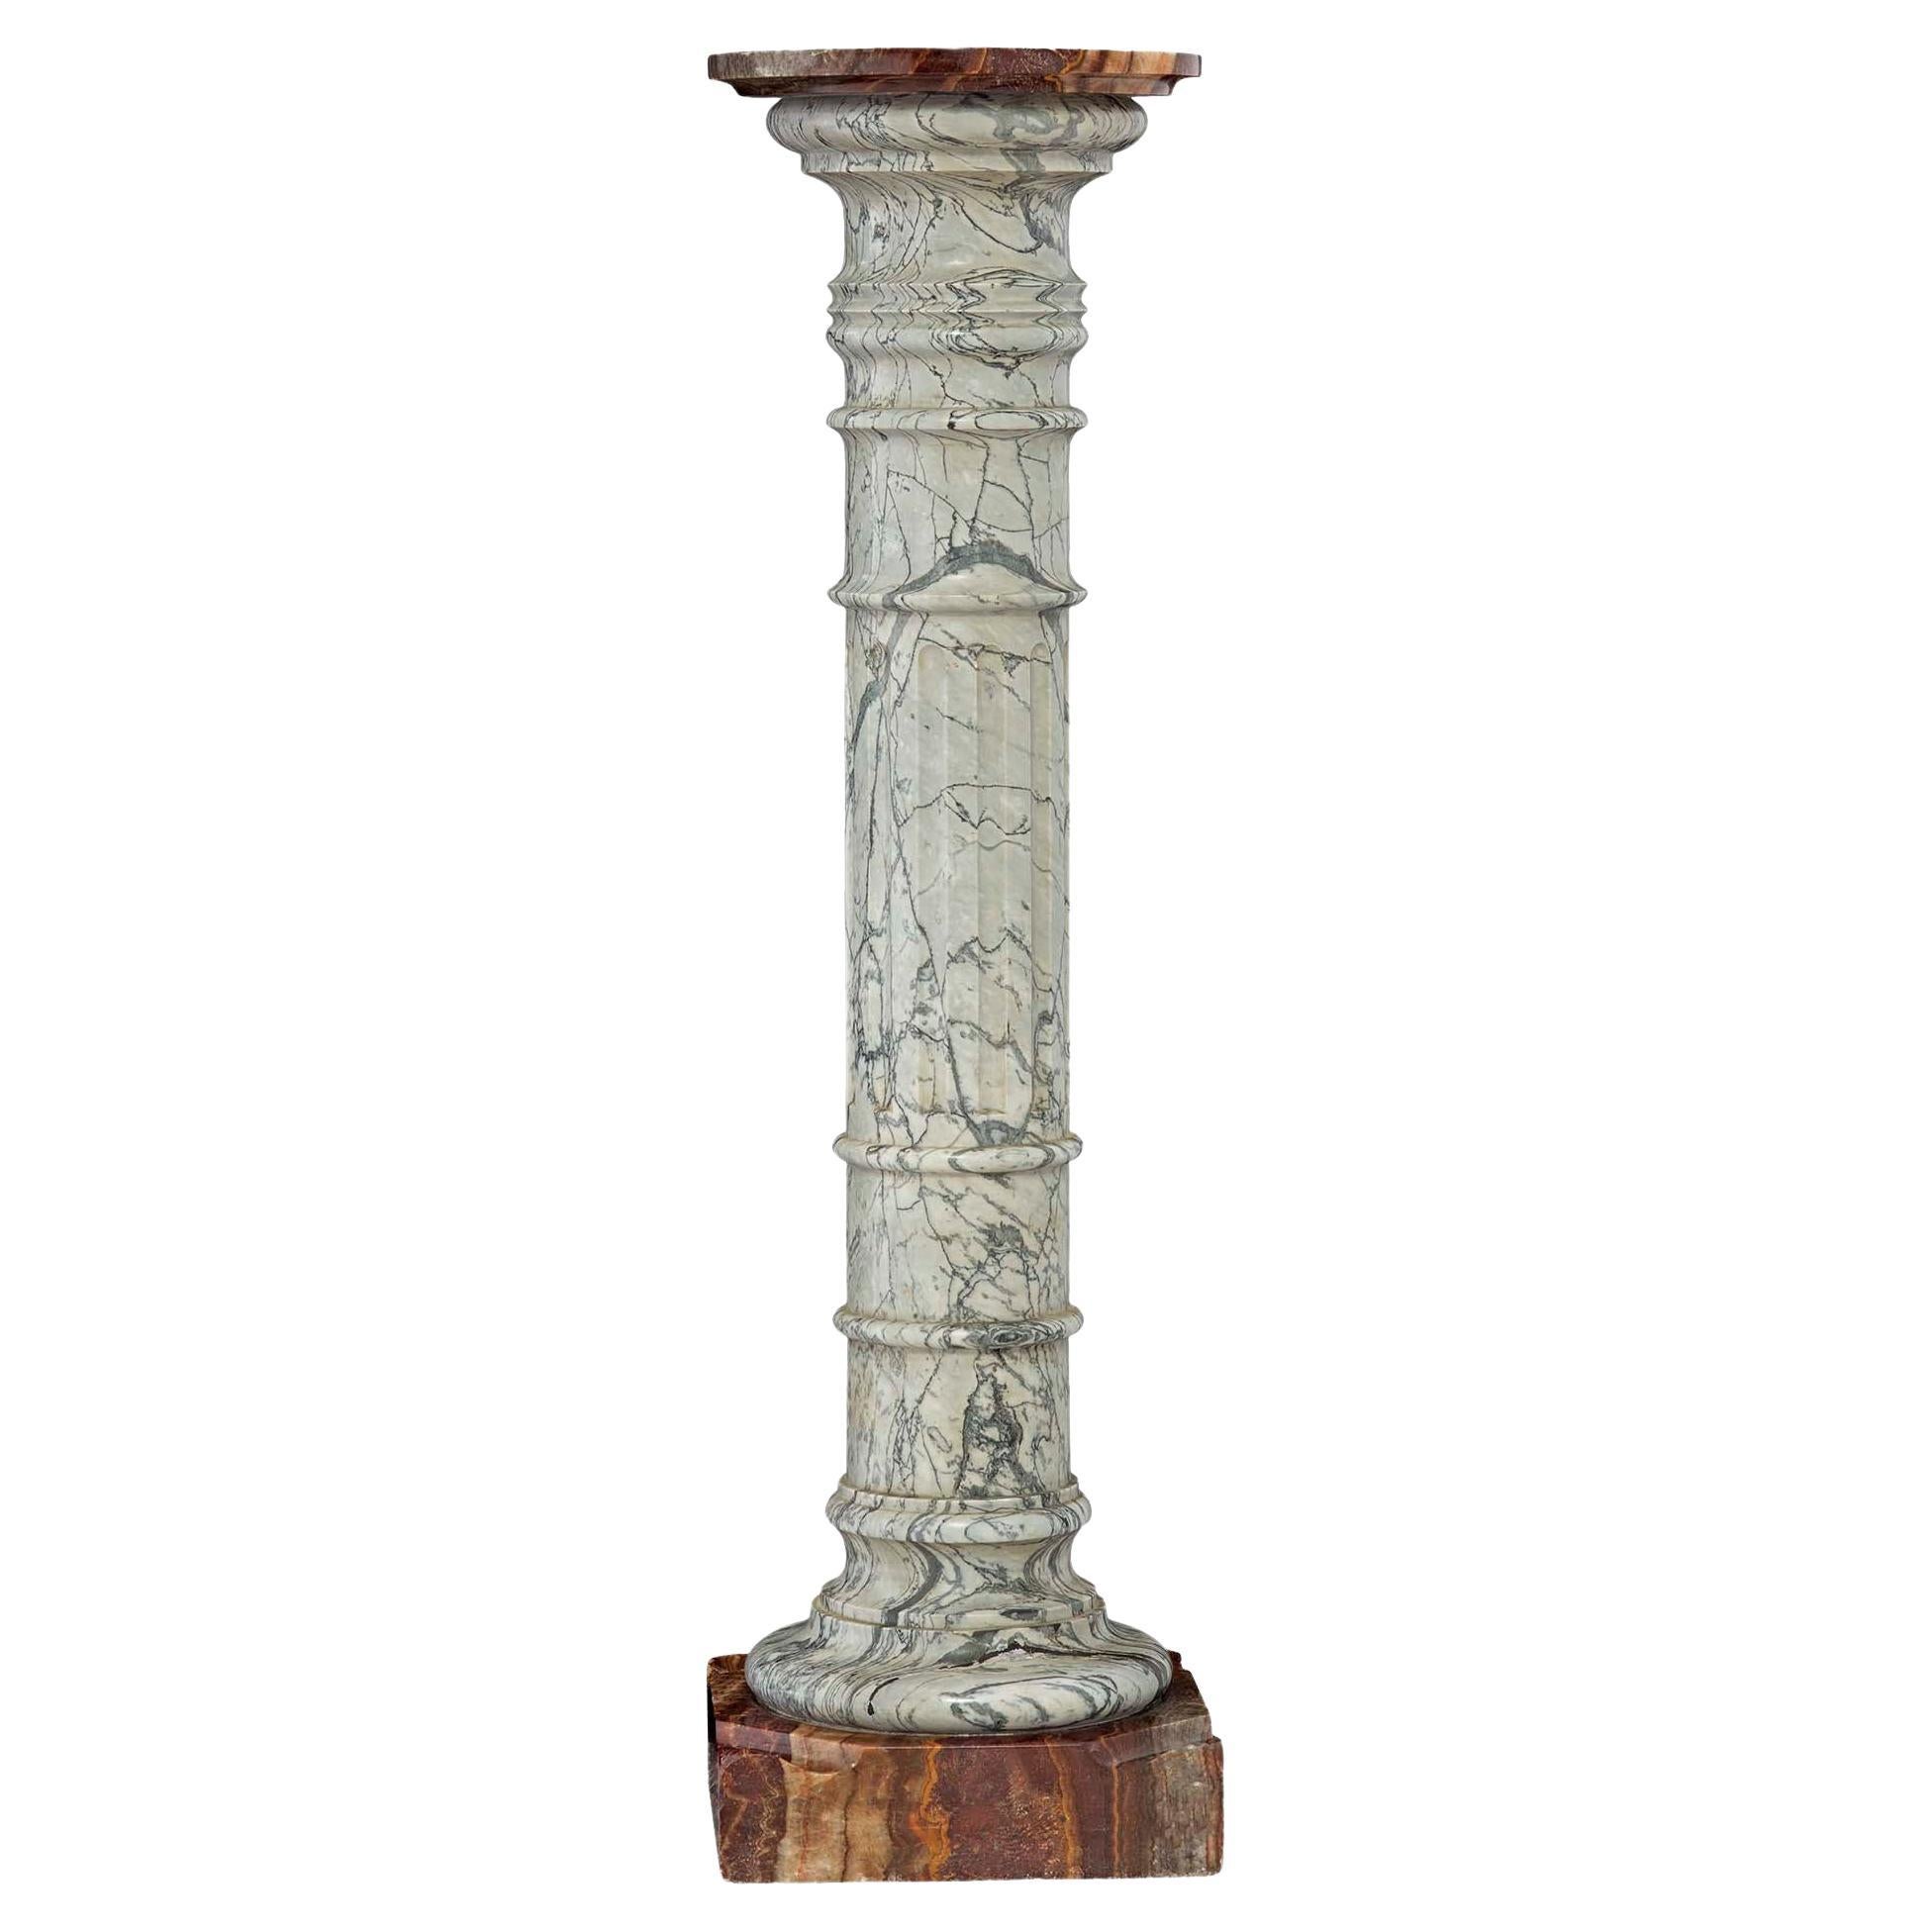 Italian 19th Century Neo-Classical St. Marble and Onyx Pedestal Column